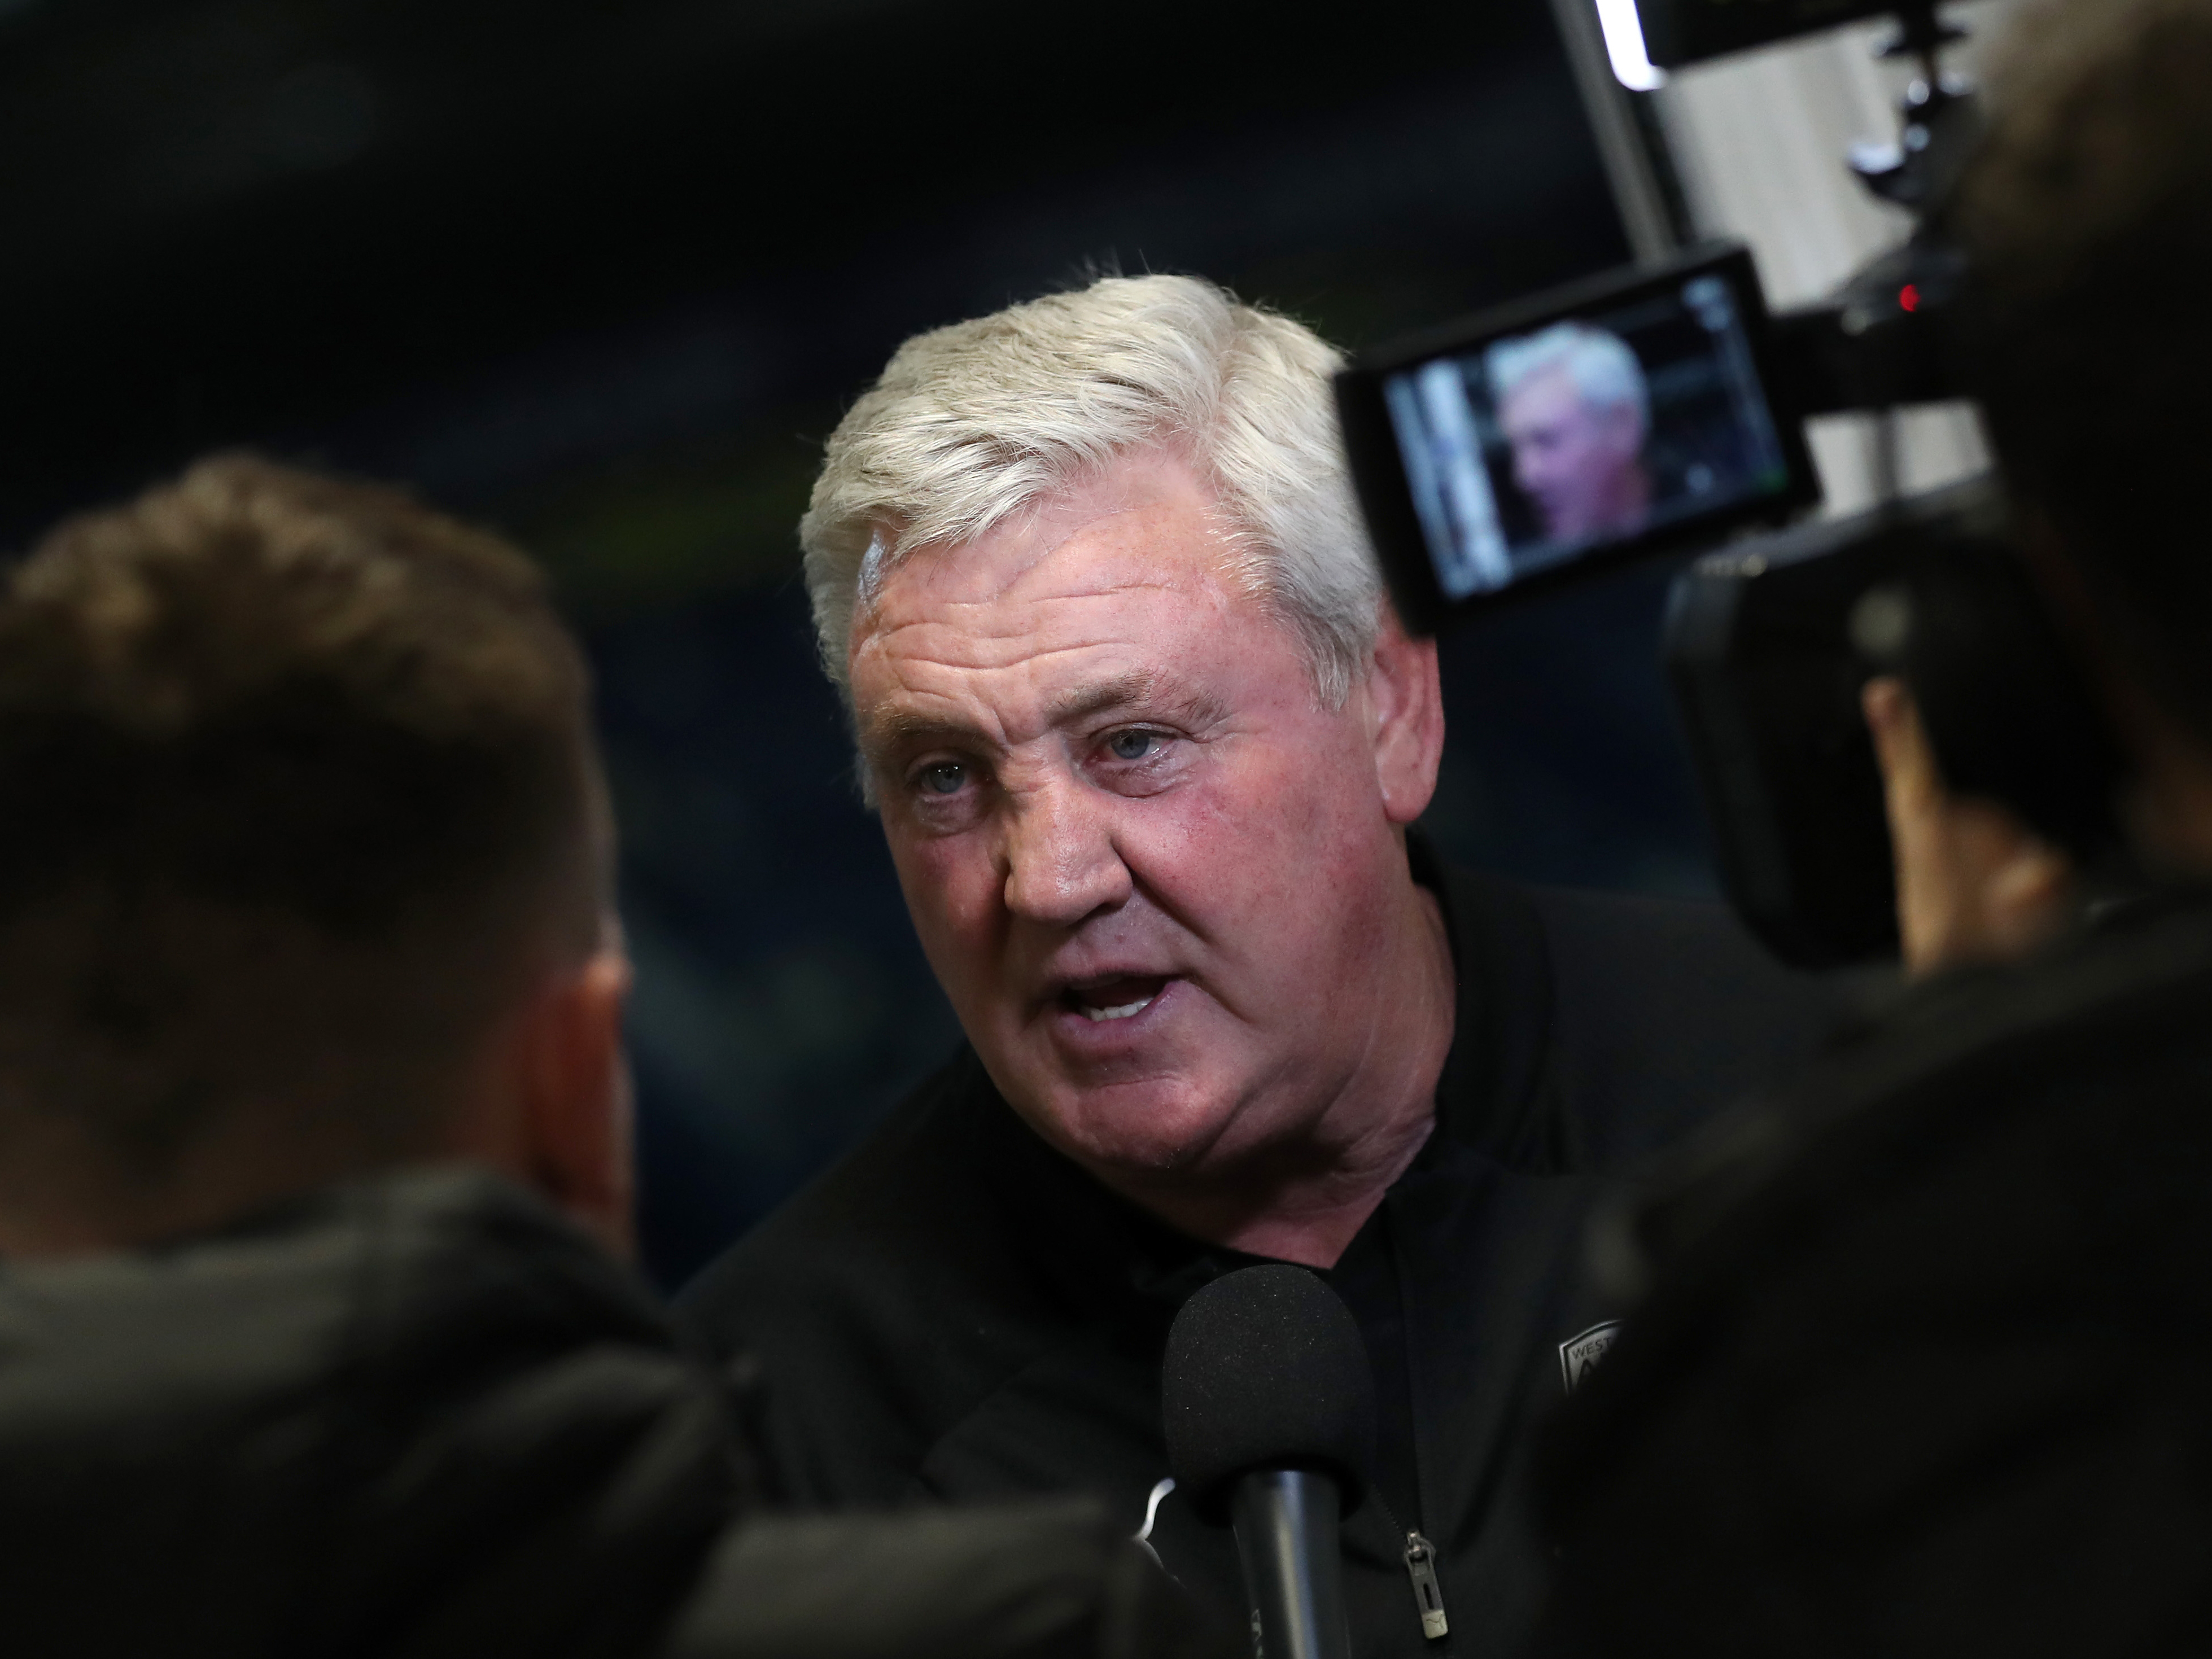 Steve Bruce speaking to WBA TV after his side's defeat at Deepdale